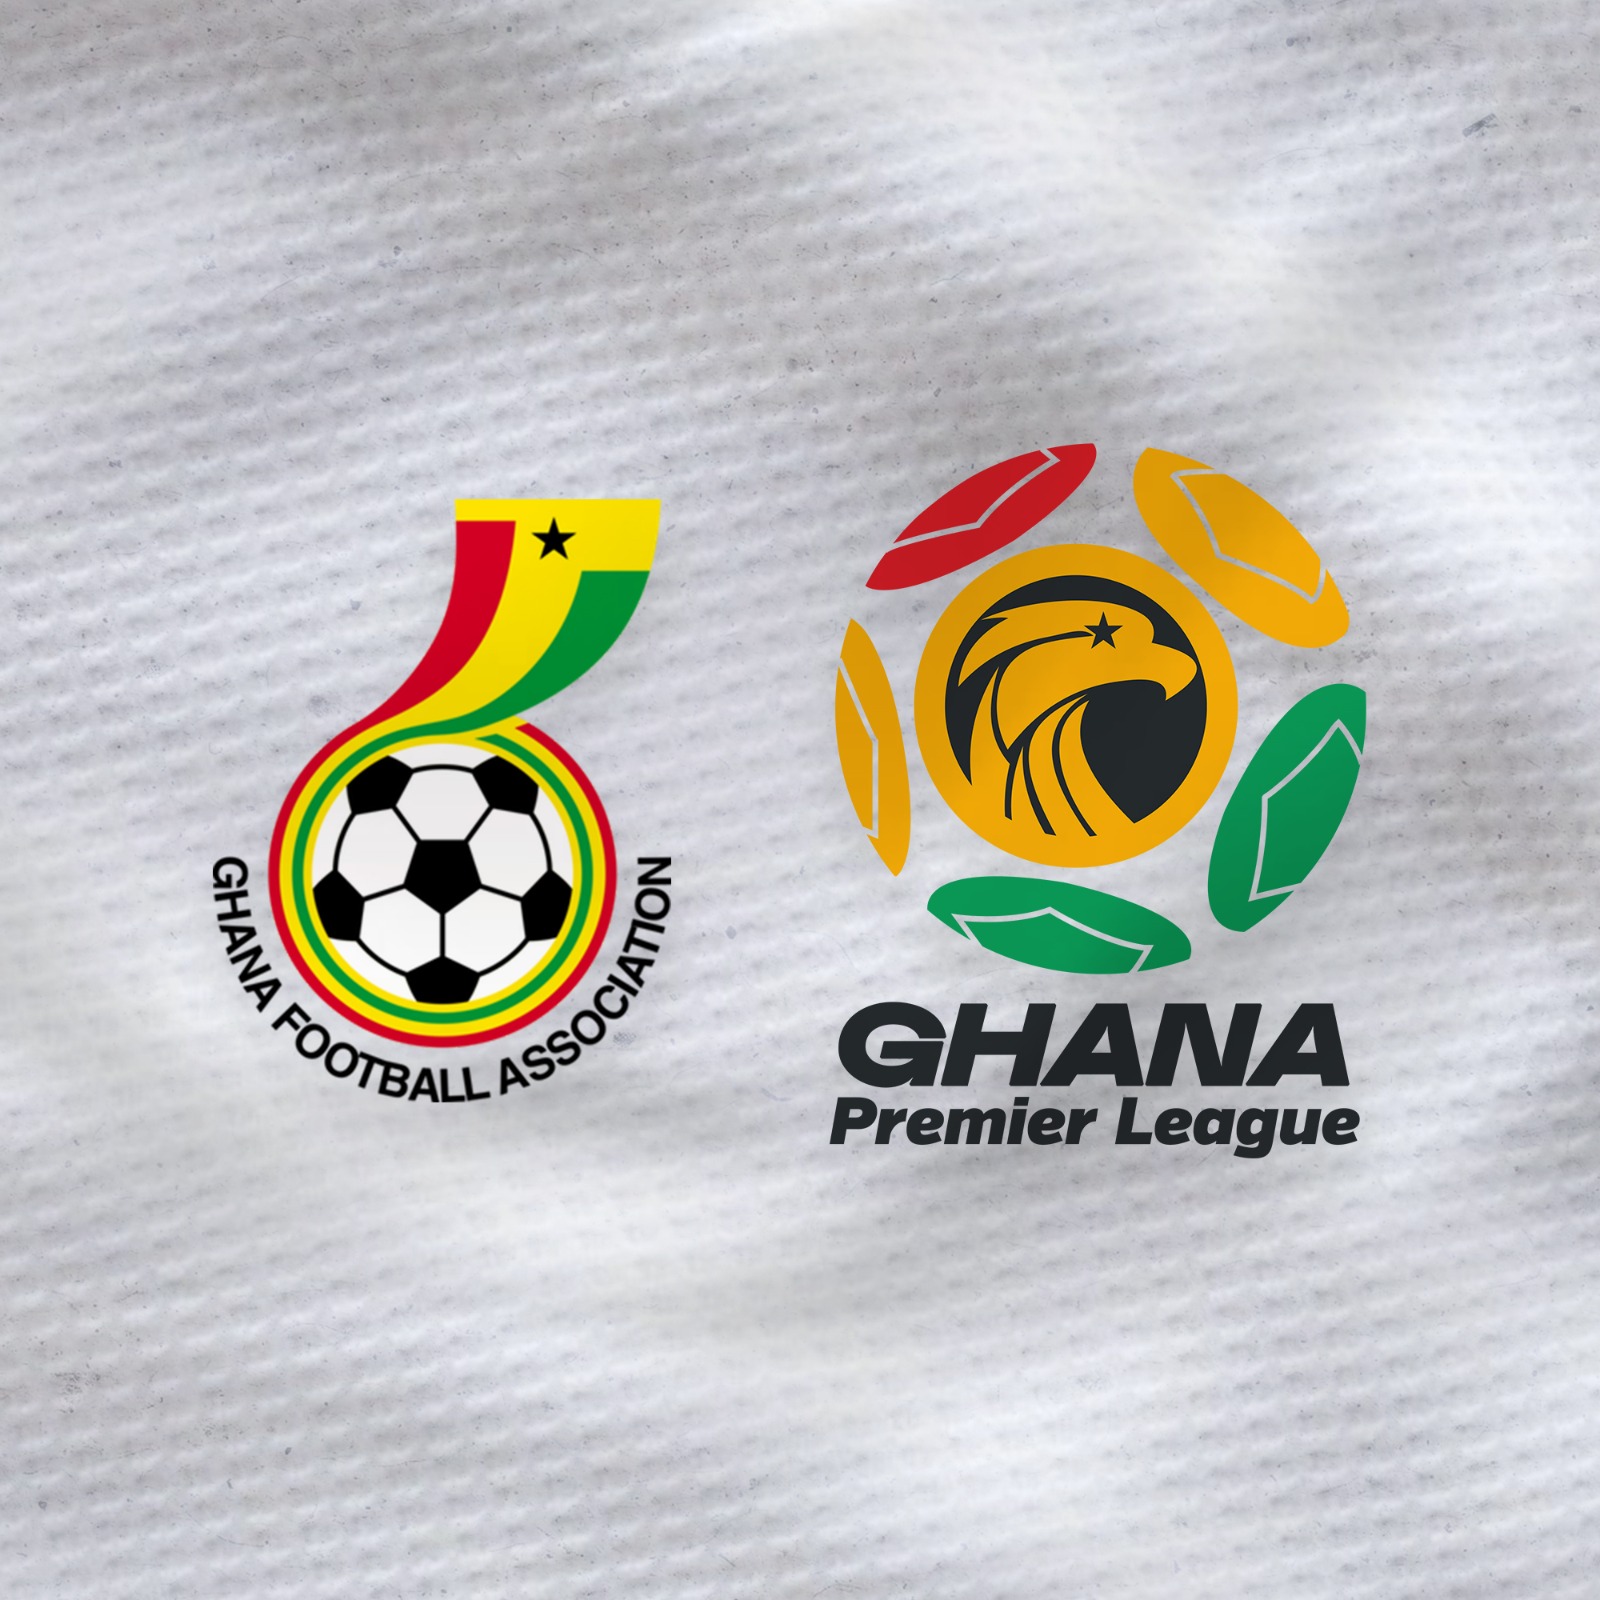 GFA hold successful meeting with Premier League clubs on revised betPawa partnership